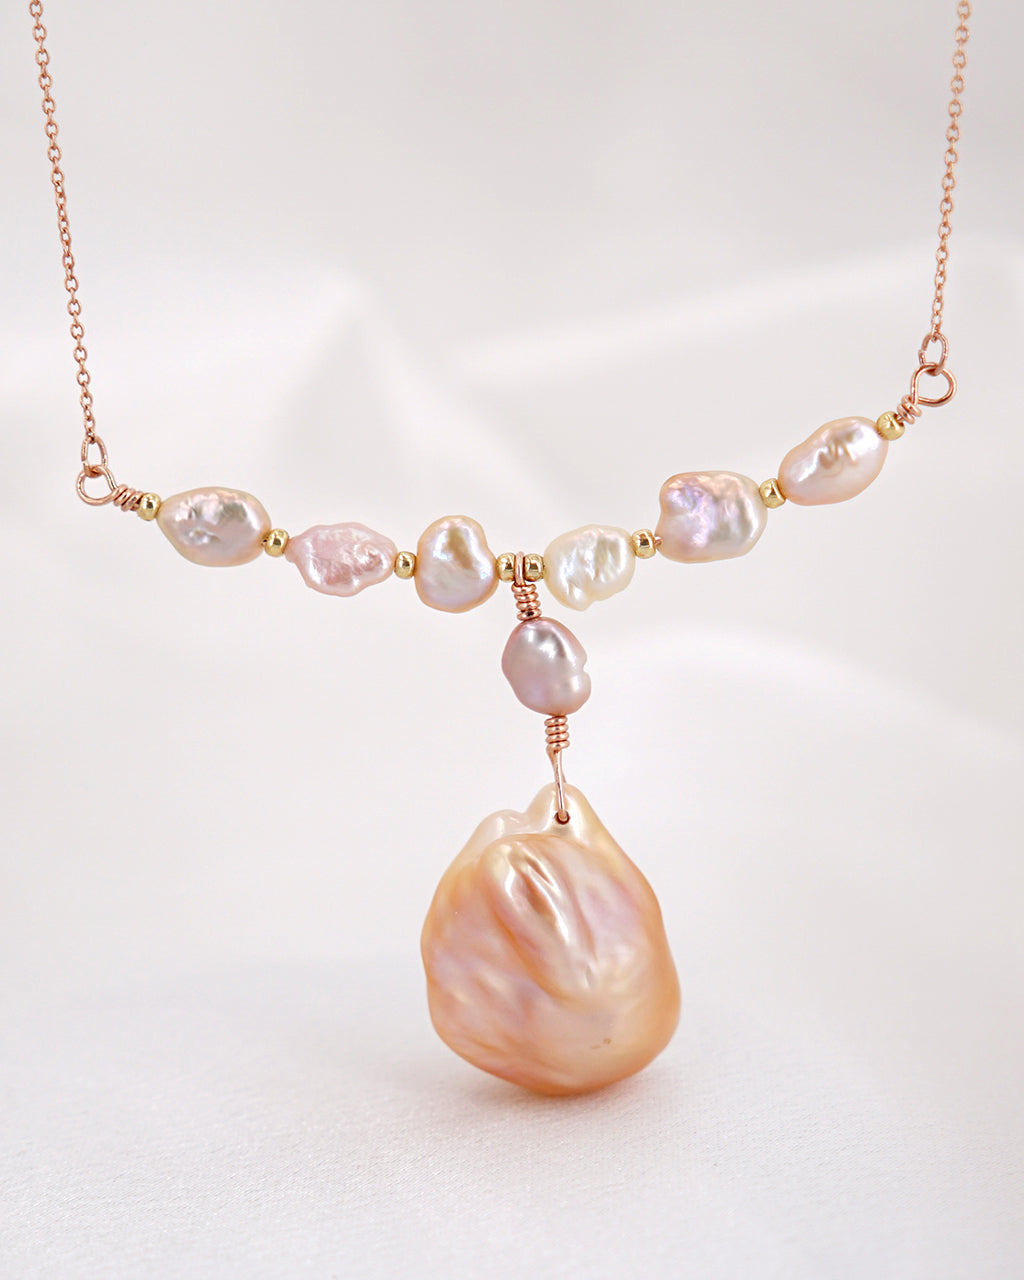 Iridescent Gold Baroque Pearl Necklace - Y-drop - Wedding Bridal Jewelry for Brides and Bridesmaids | Singapore